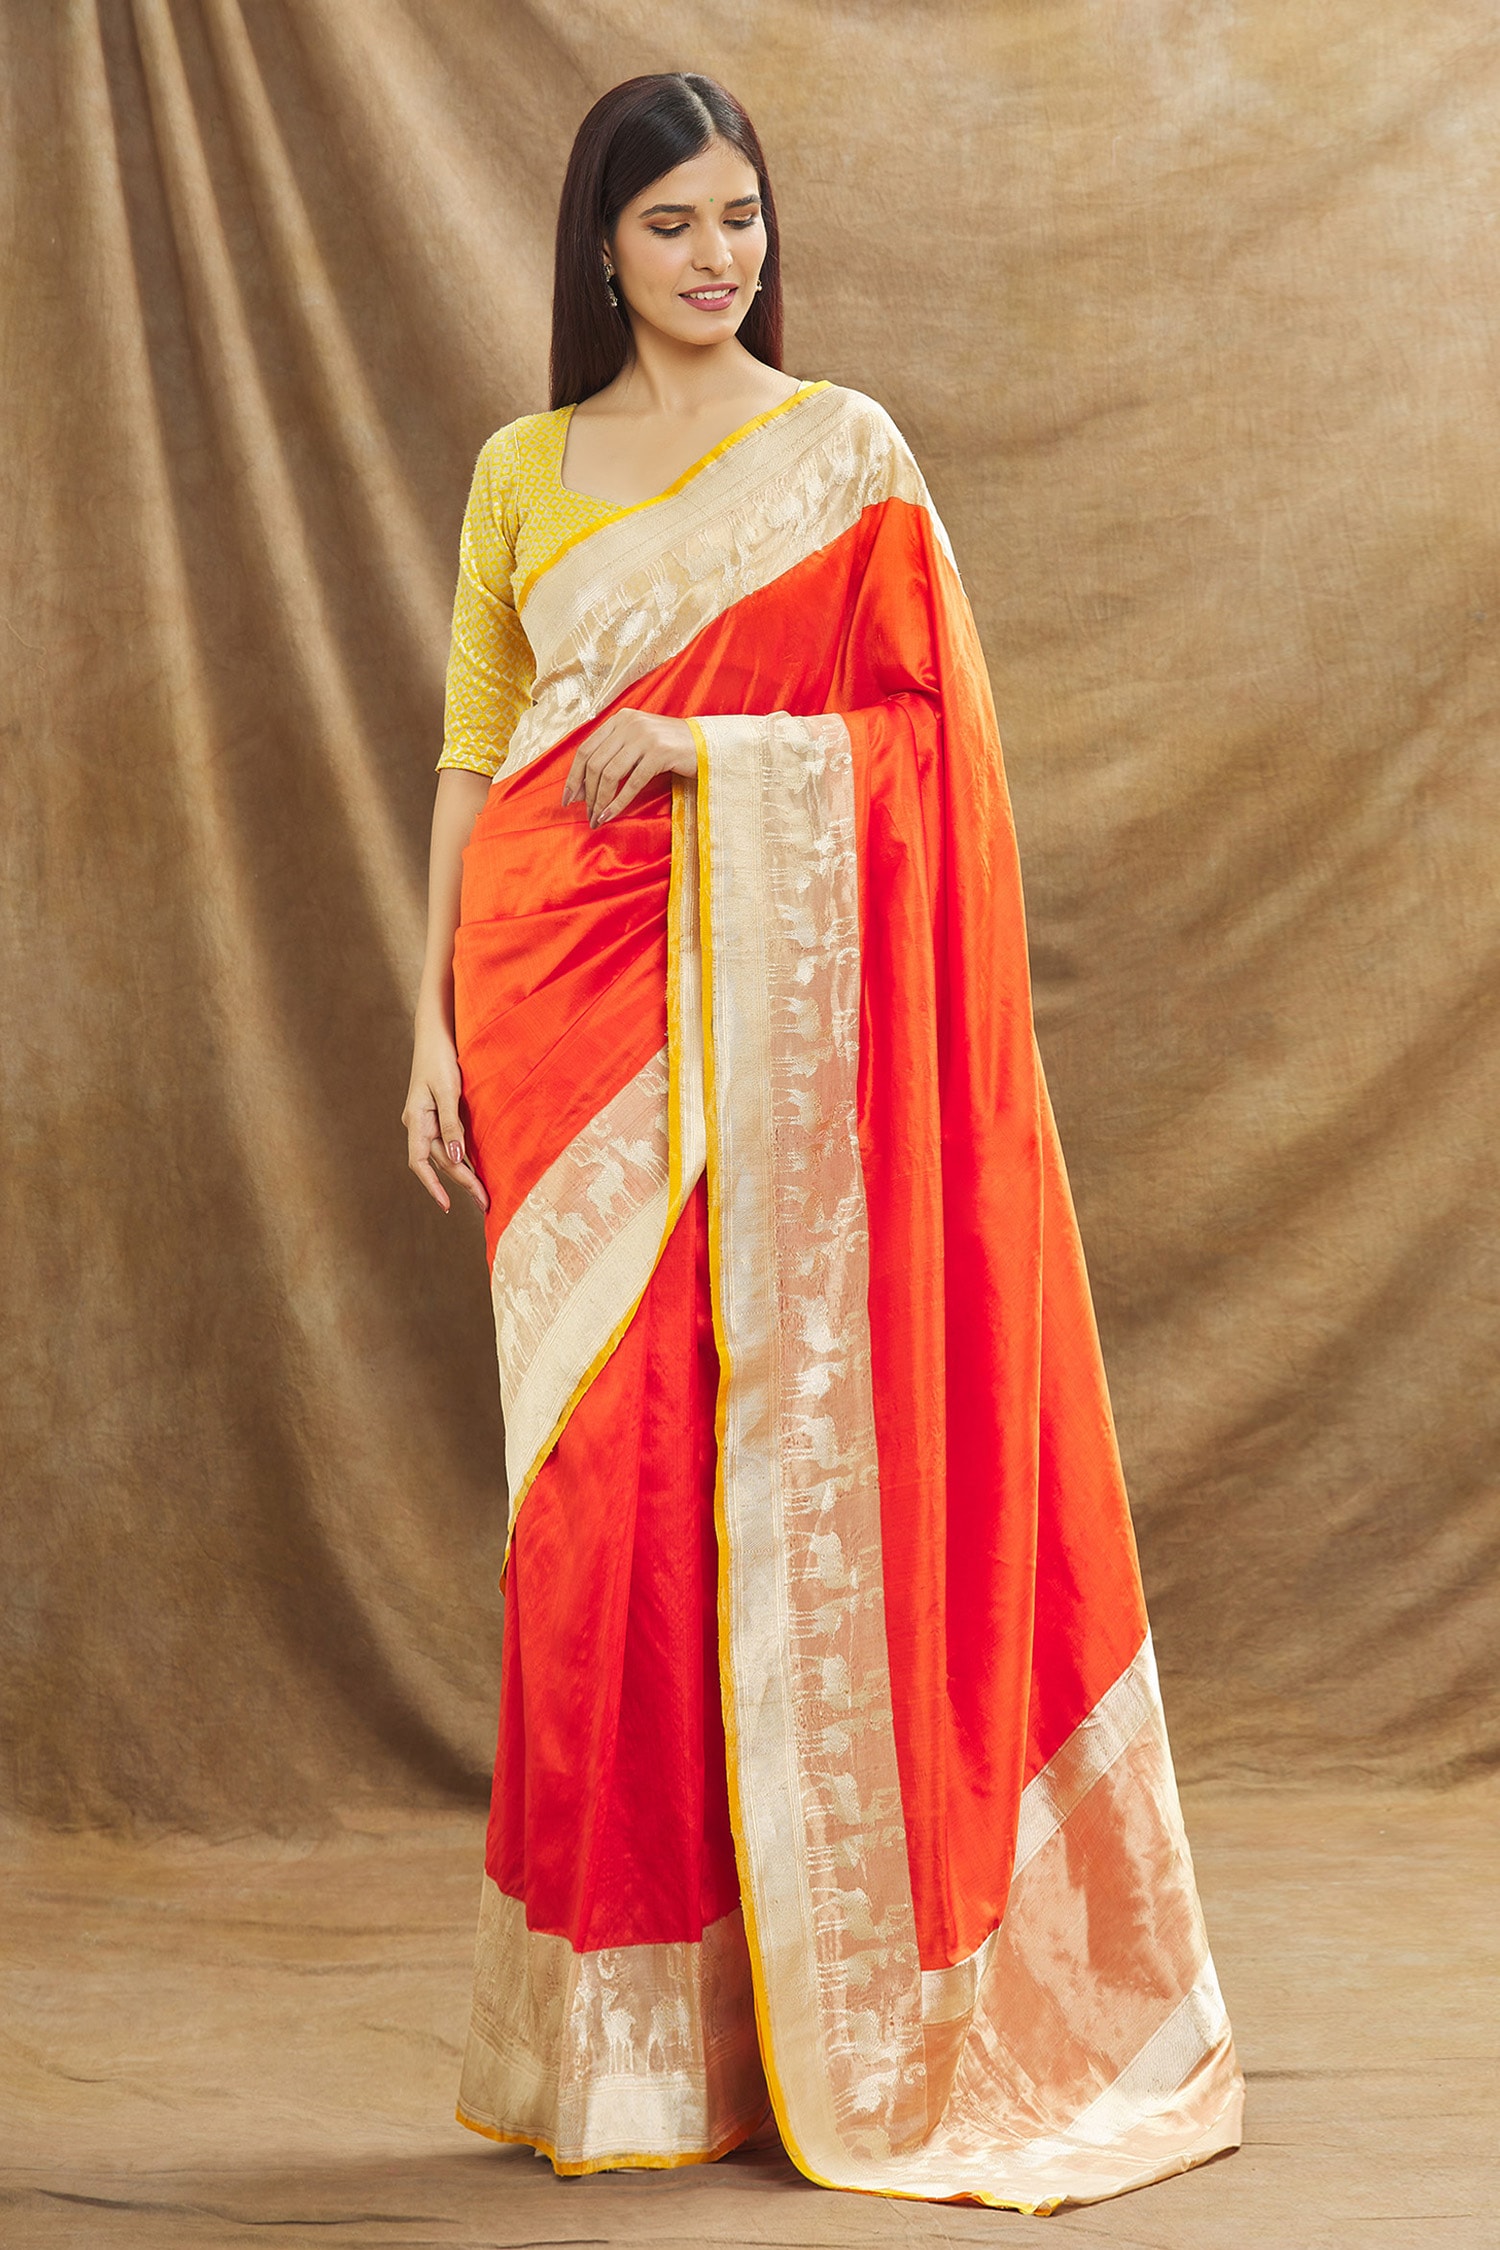 Silk Kerala Saree For Onam With Blouse|Miss Imperial|Suta